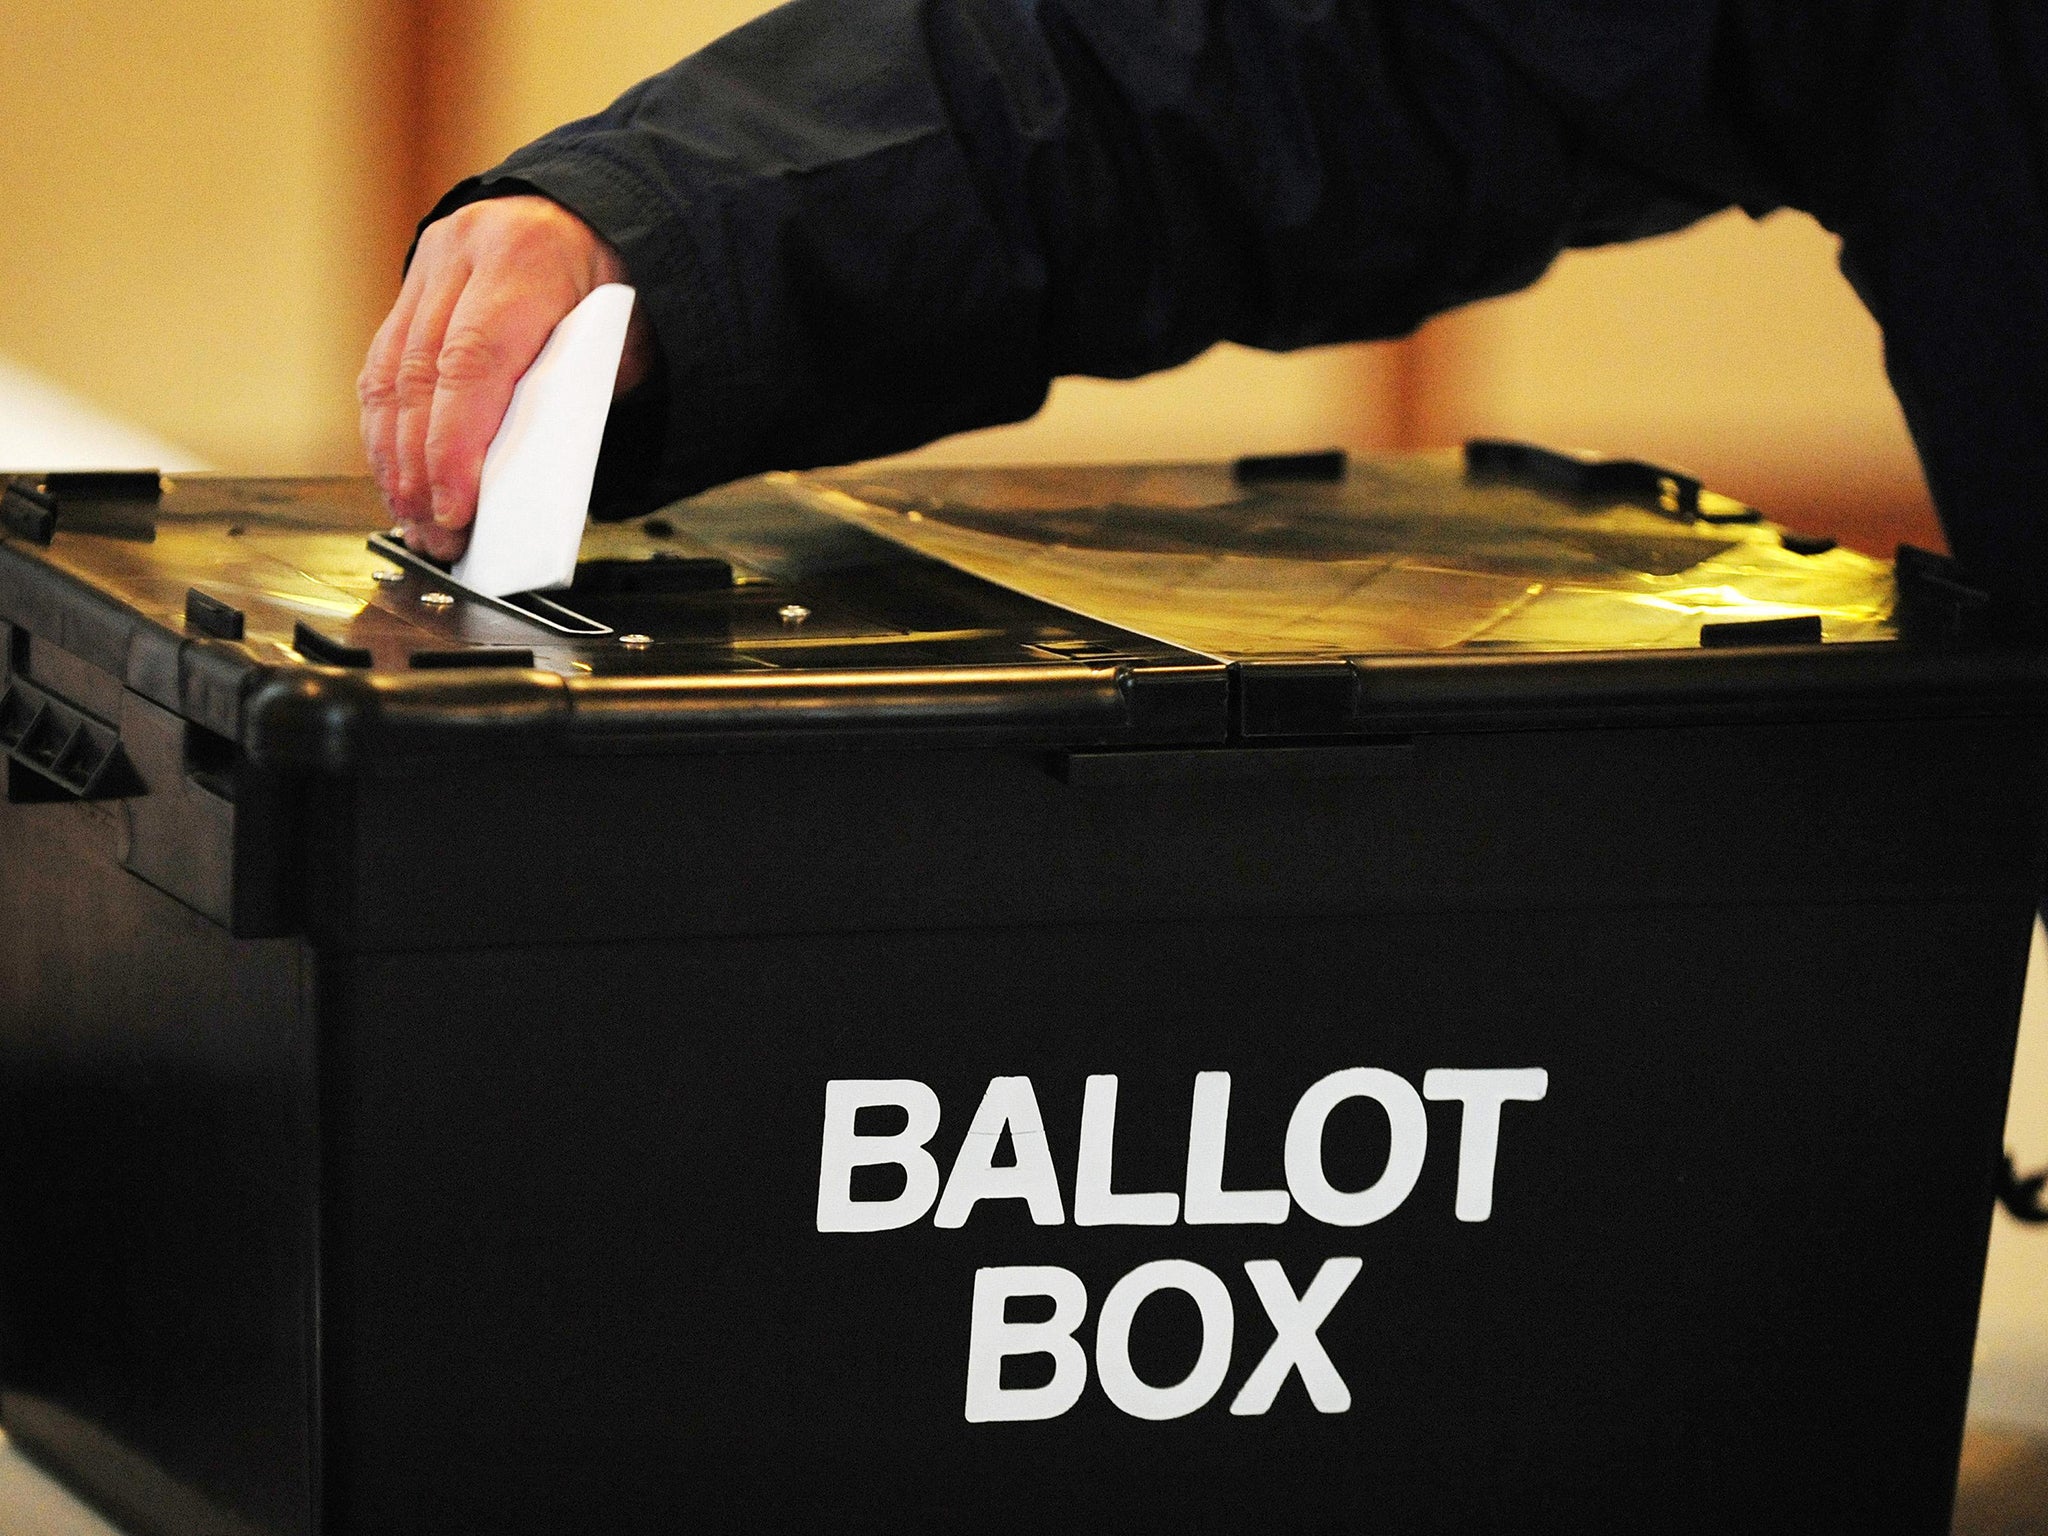 UK general elections are decided using the first past the post system